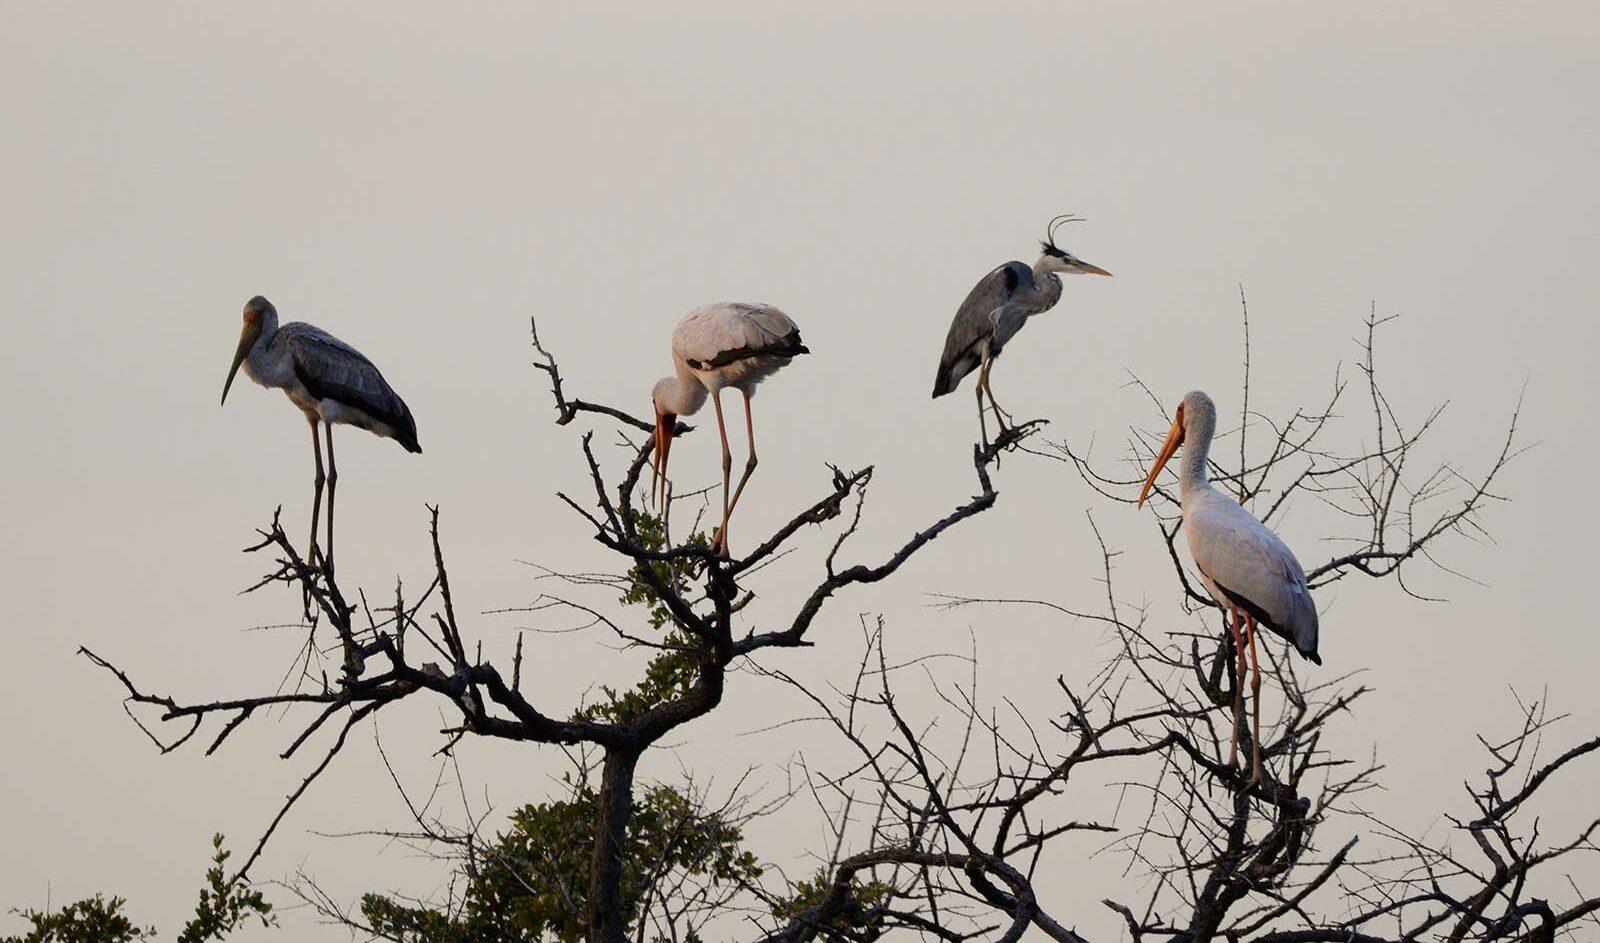 Yellow-billed storks and a grey heron